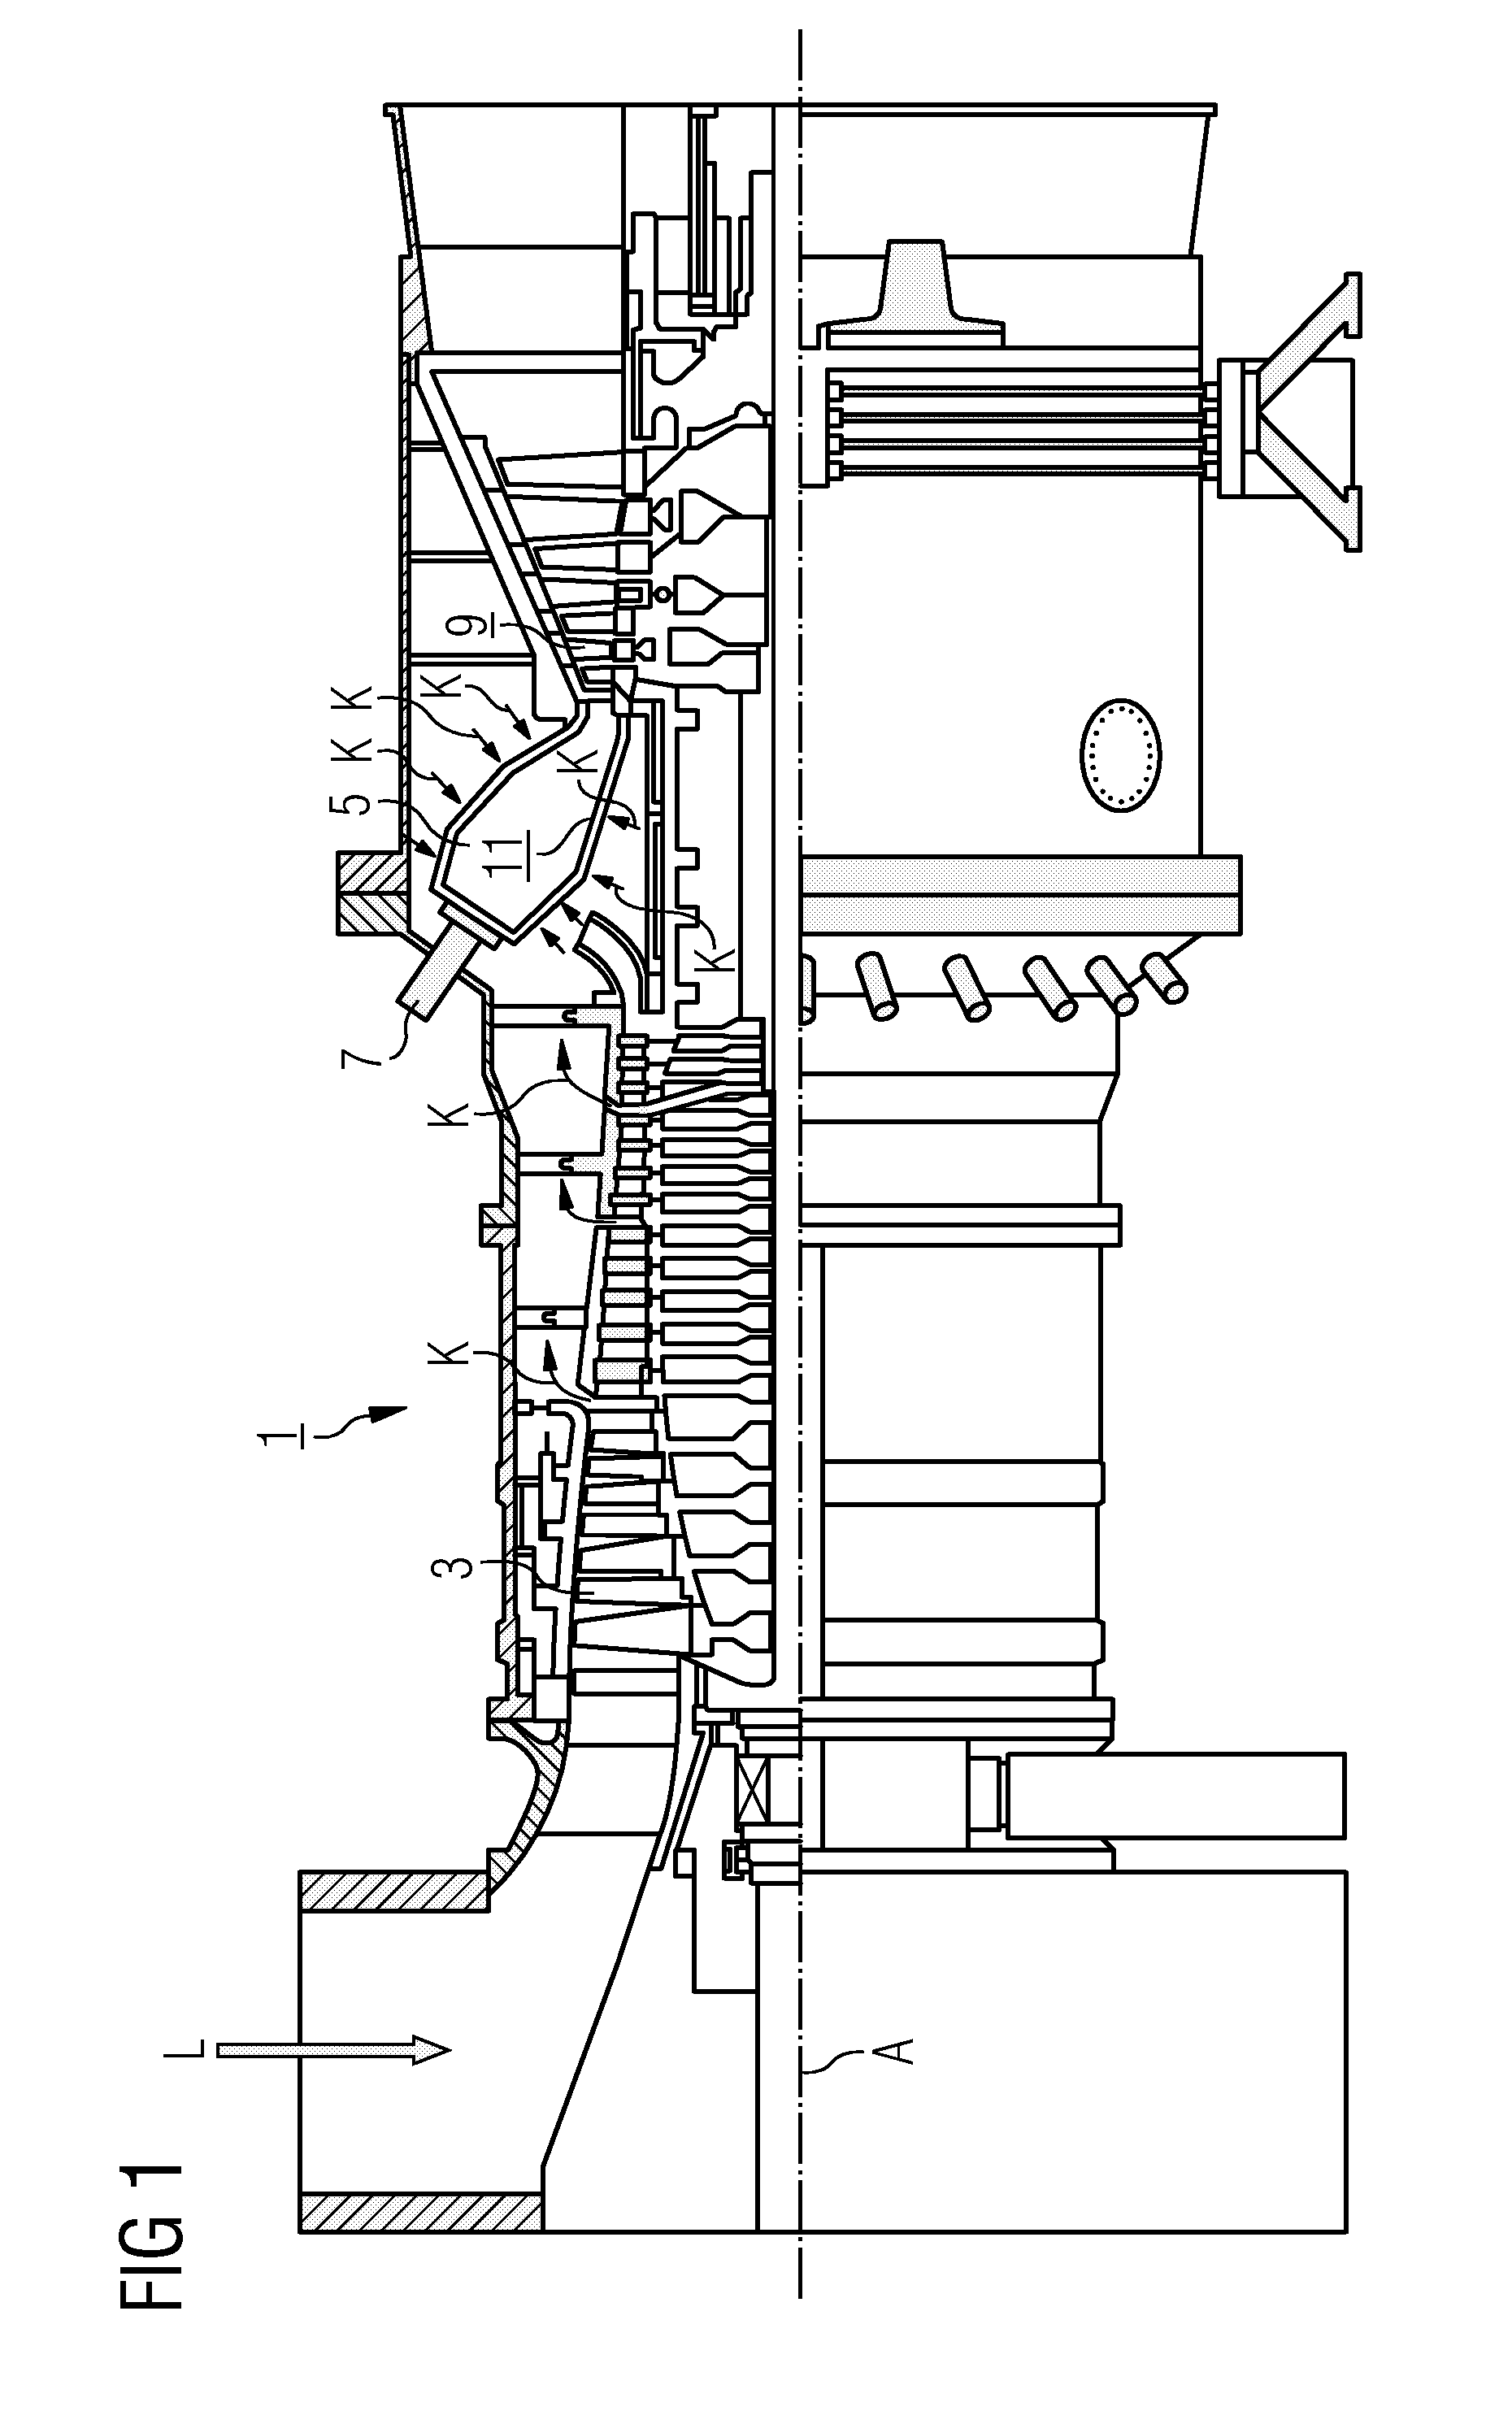 Method of Optimum Controlled Outlet, Impingement Cooling and Sealing of a Heat Shield and a Heat Shield Element